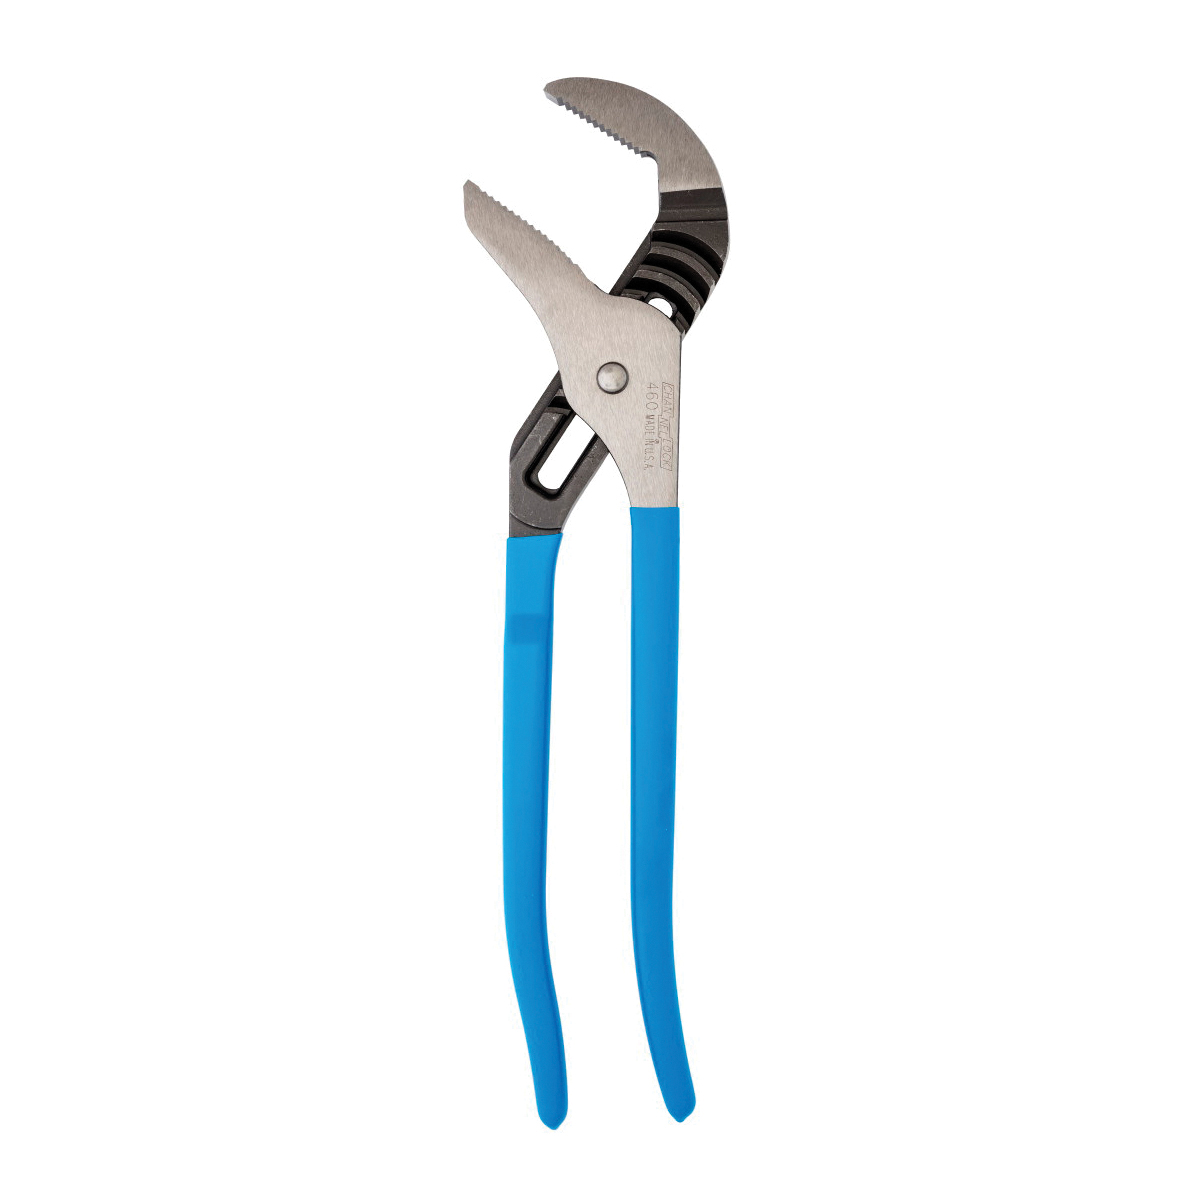 CHANNELLOCK® 460 Tongue and Groove Plier, 16-1/2 in OAL, 4-1/4 in Cutting Capacity, 0.59 in W Jaw, 2.56 in L Jaw